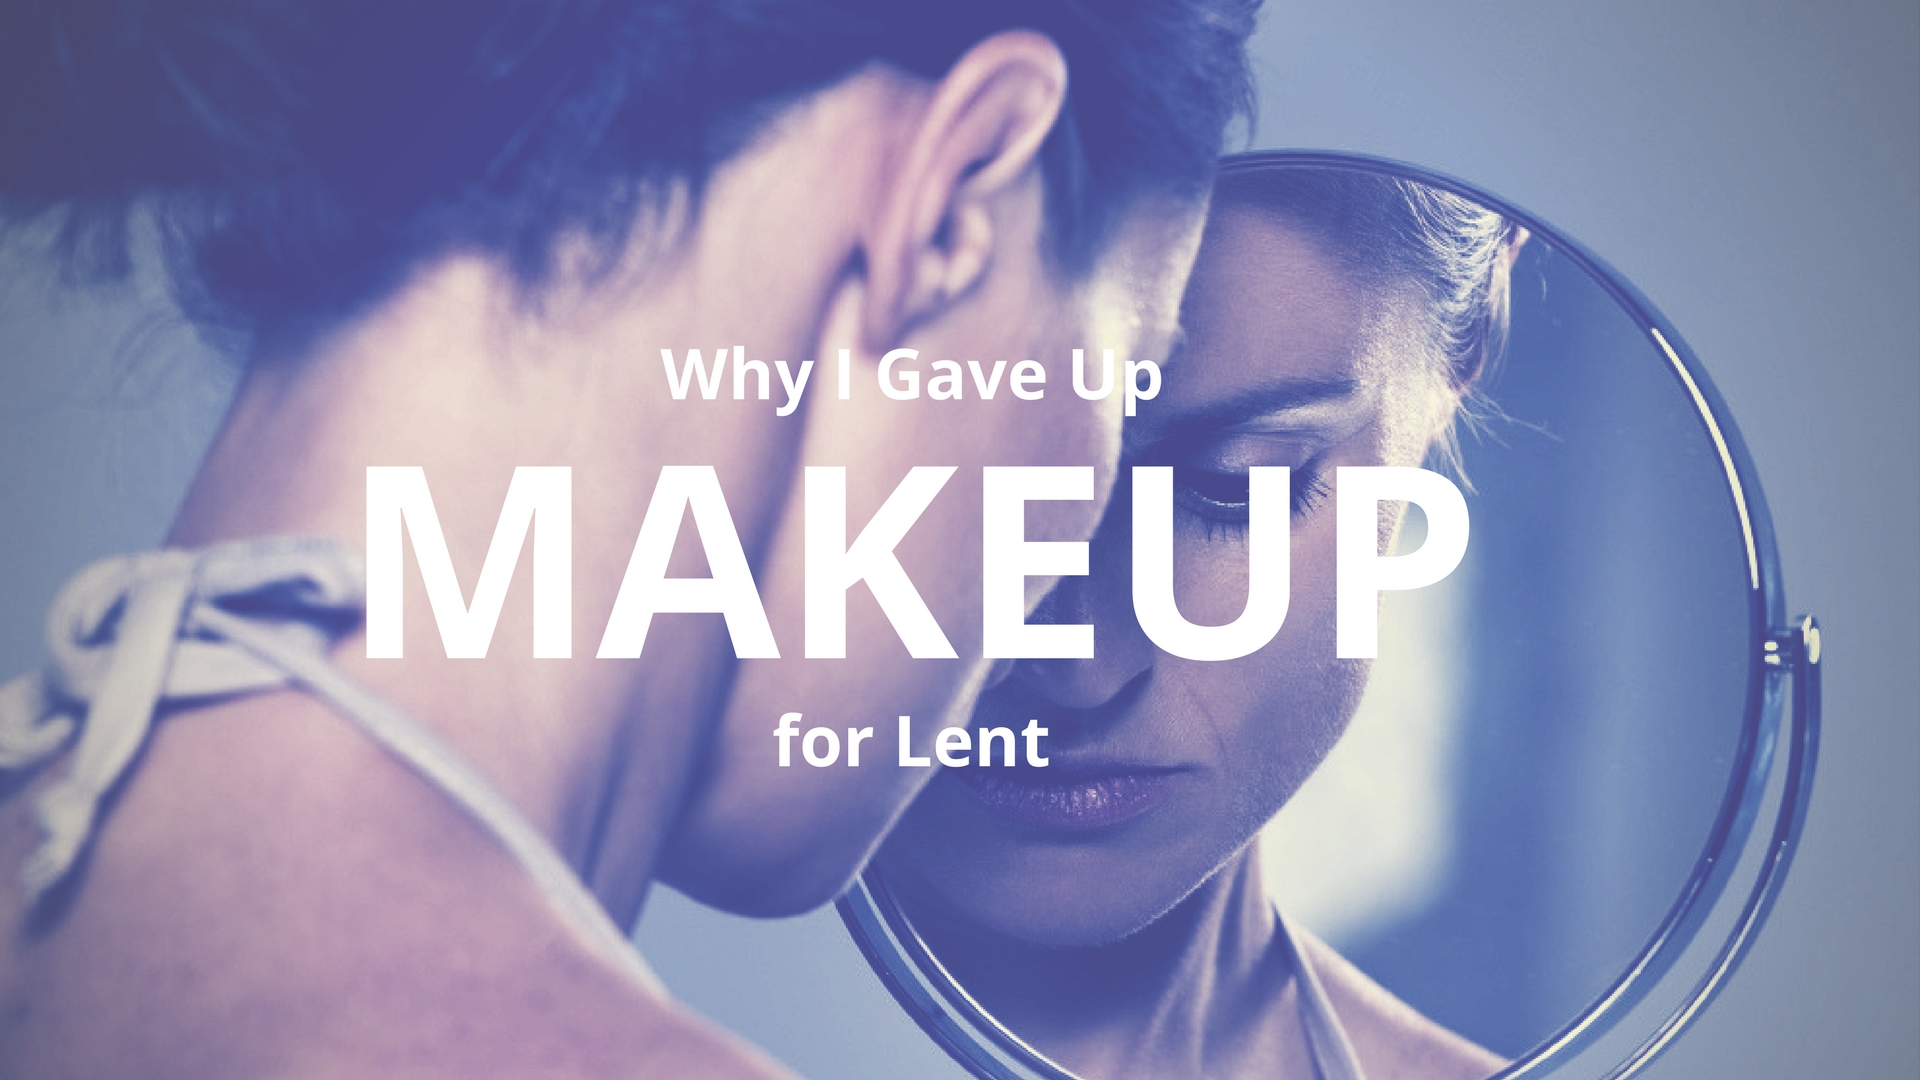 what I gave up makeup for lent, woman looking at herself in the mirror